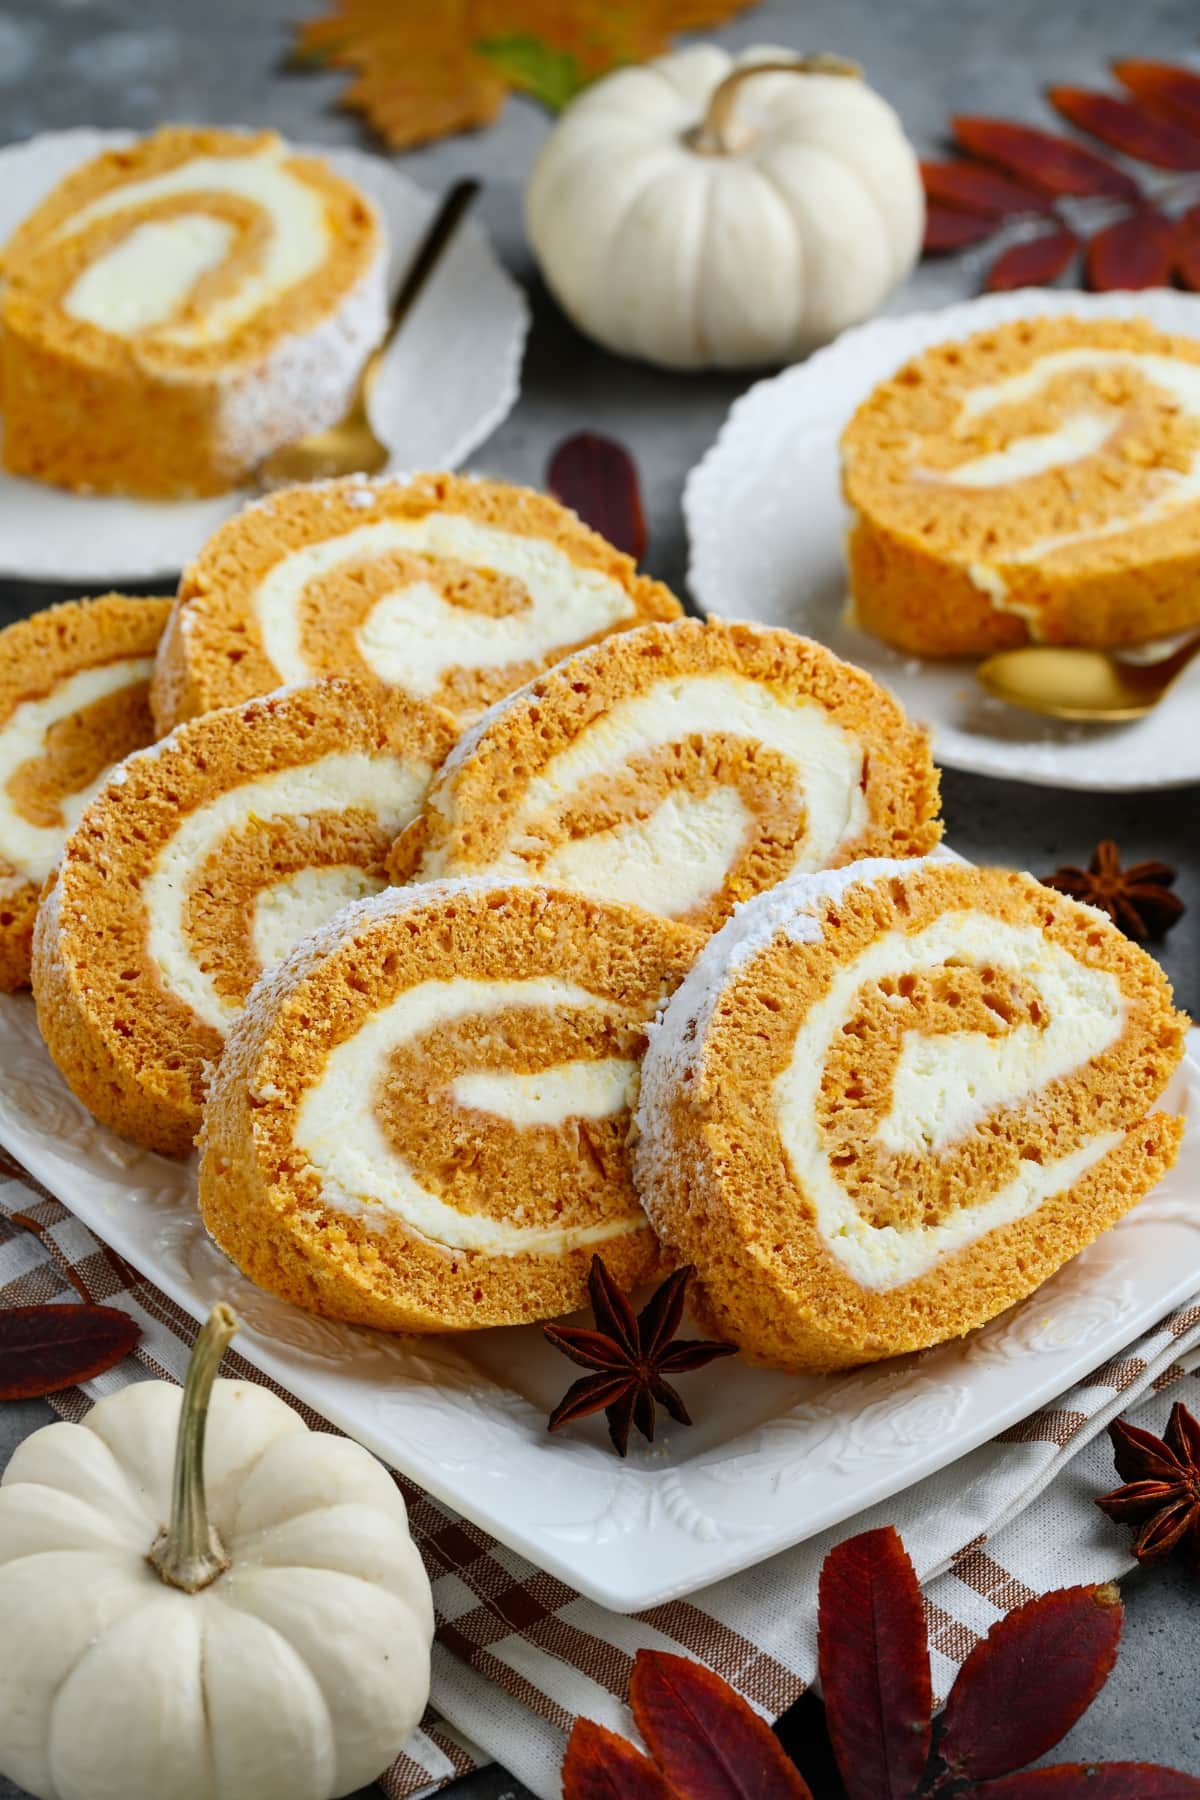 Pumpkin Roll Cake with Cream Cheese Frosting on a Plate